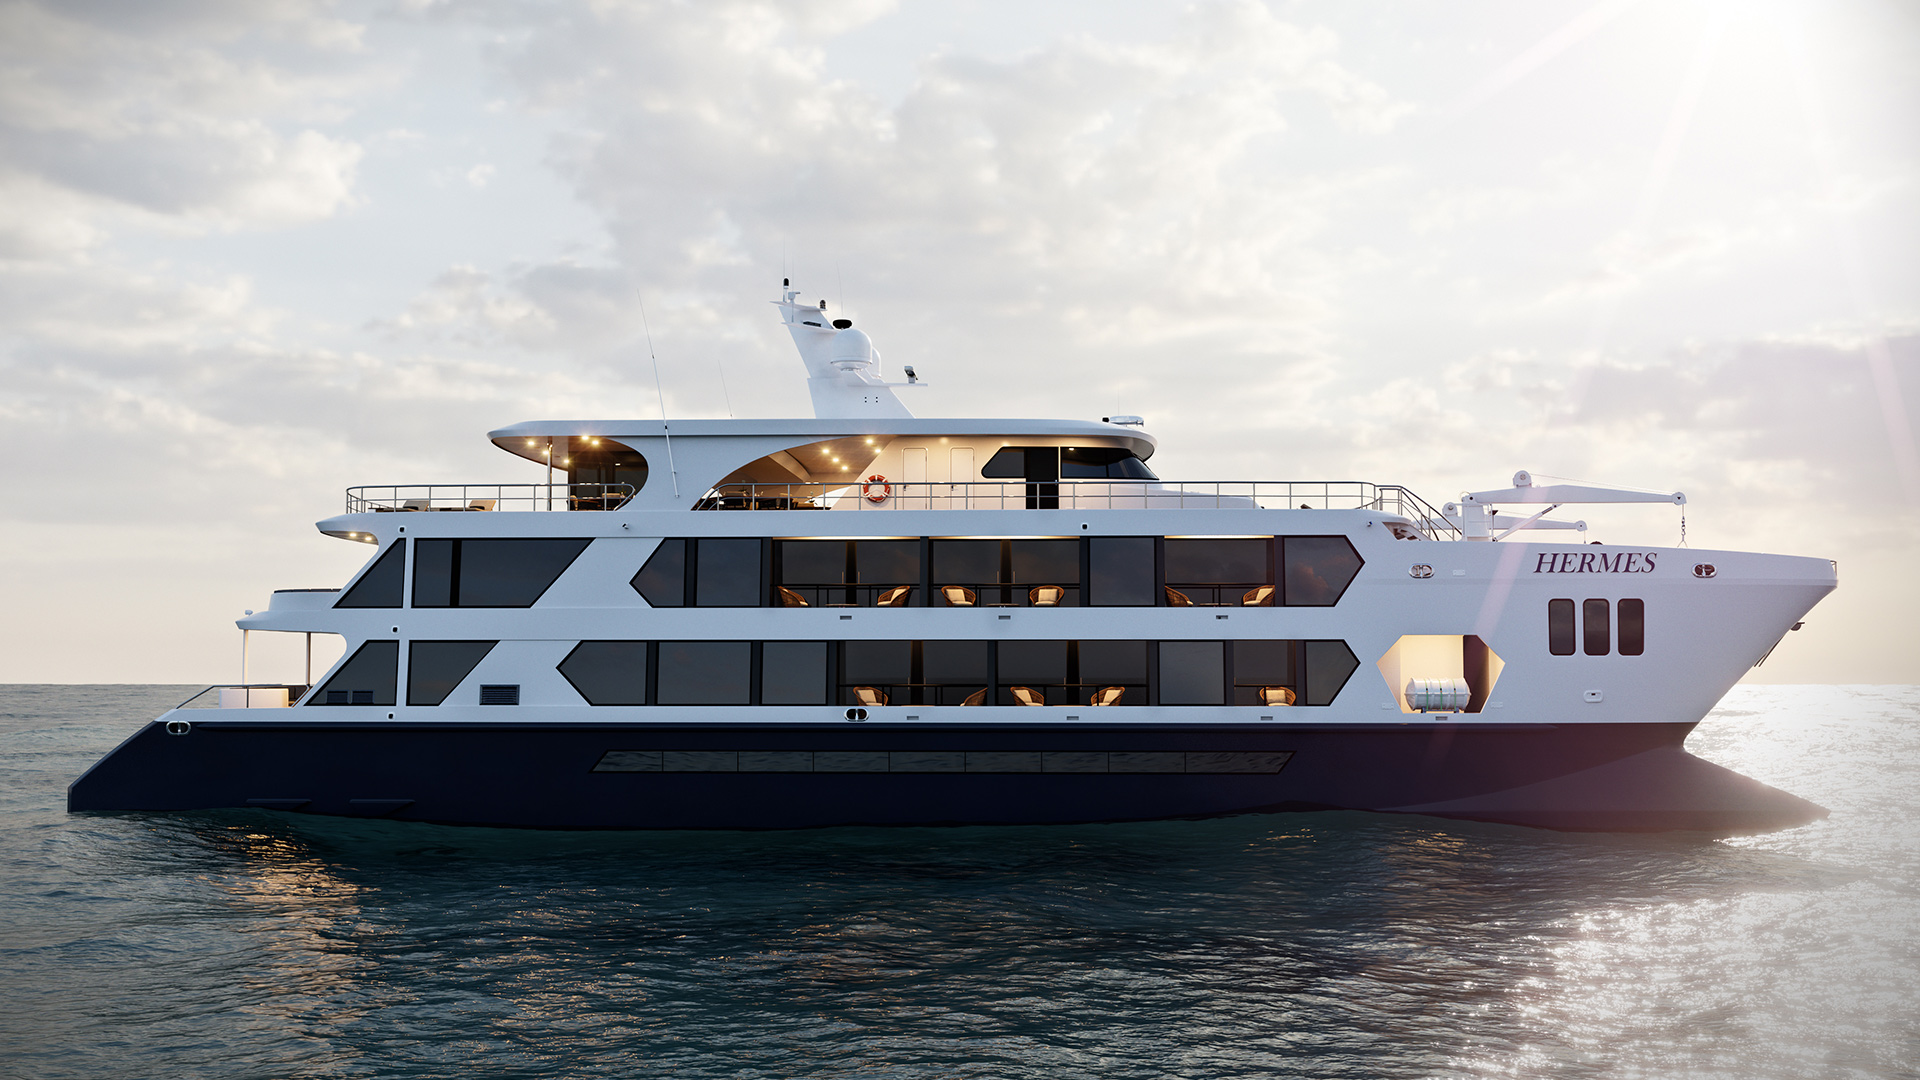 Hermes Yacht | EYOS Expeditions